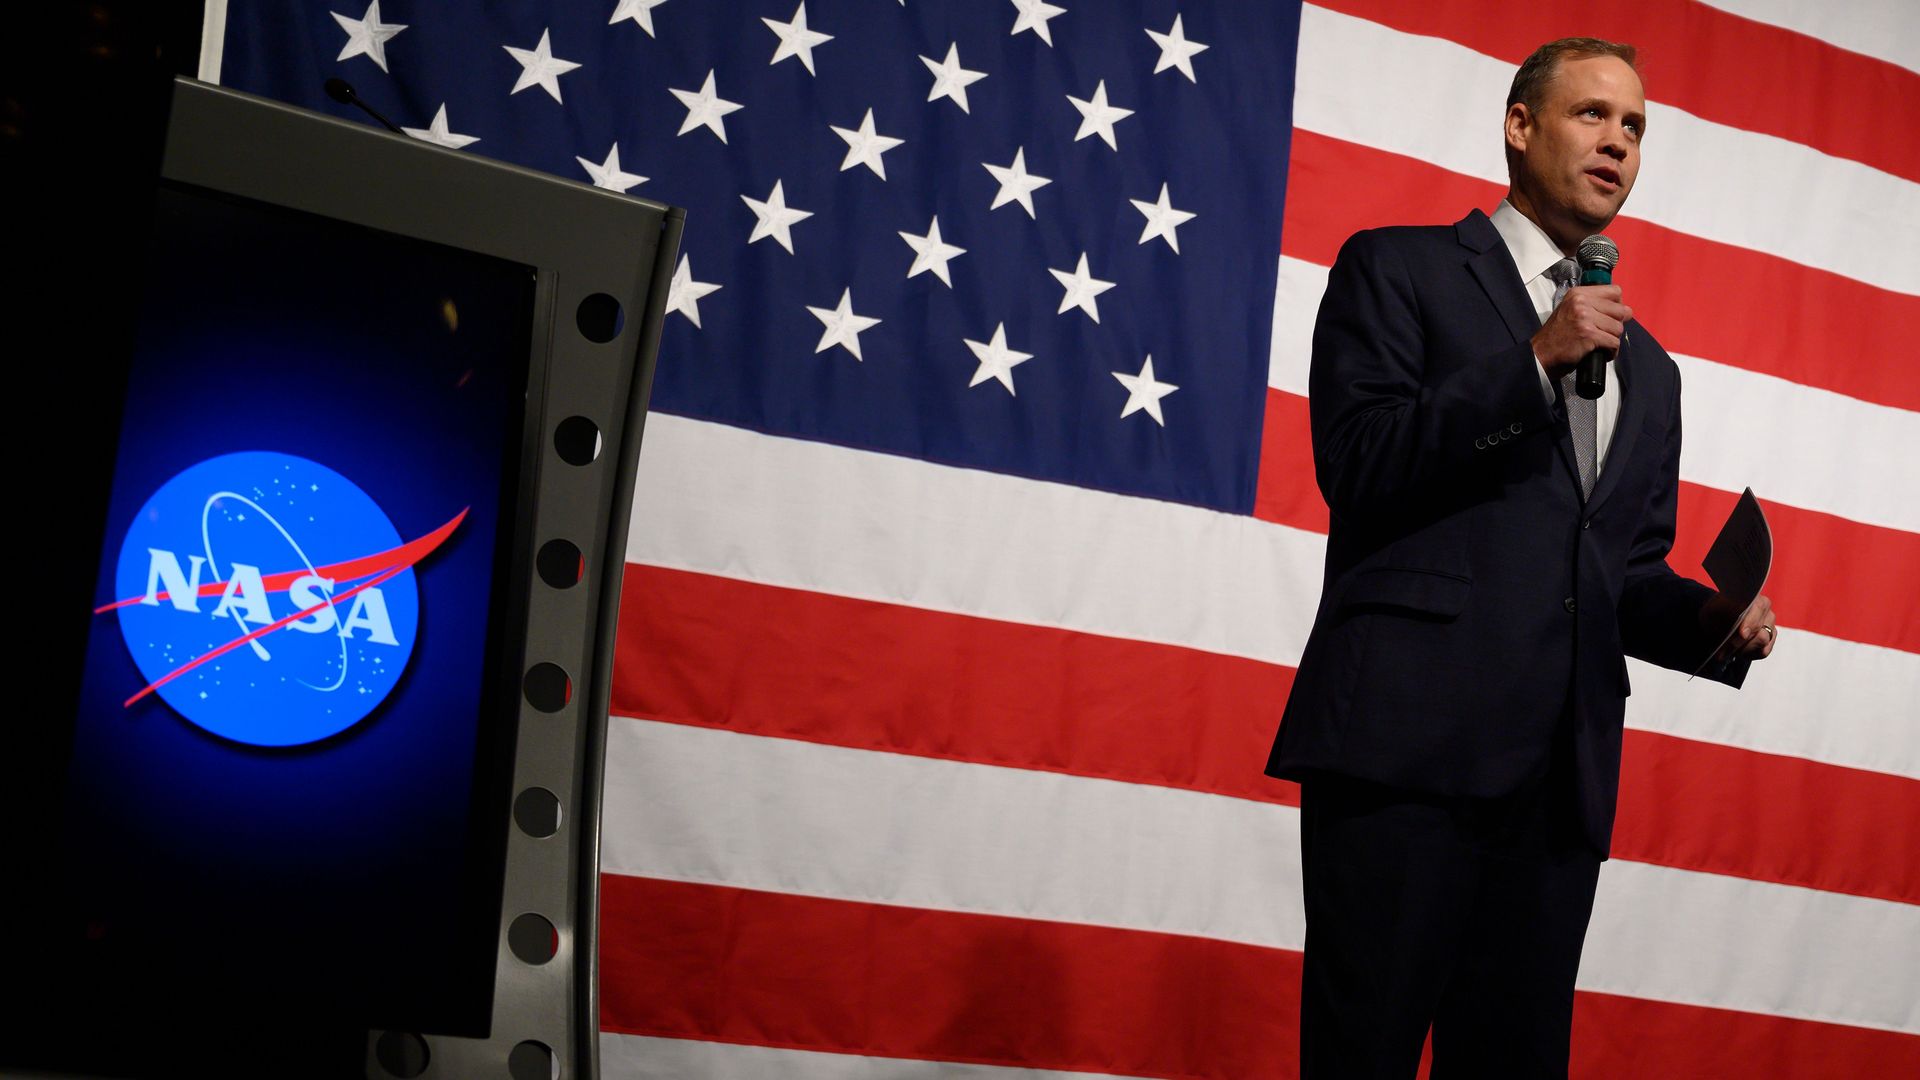 In this image, a man in a suit holds and speaks into a microphone with the American flag behind him.